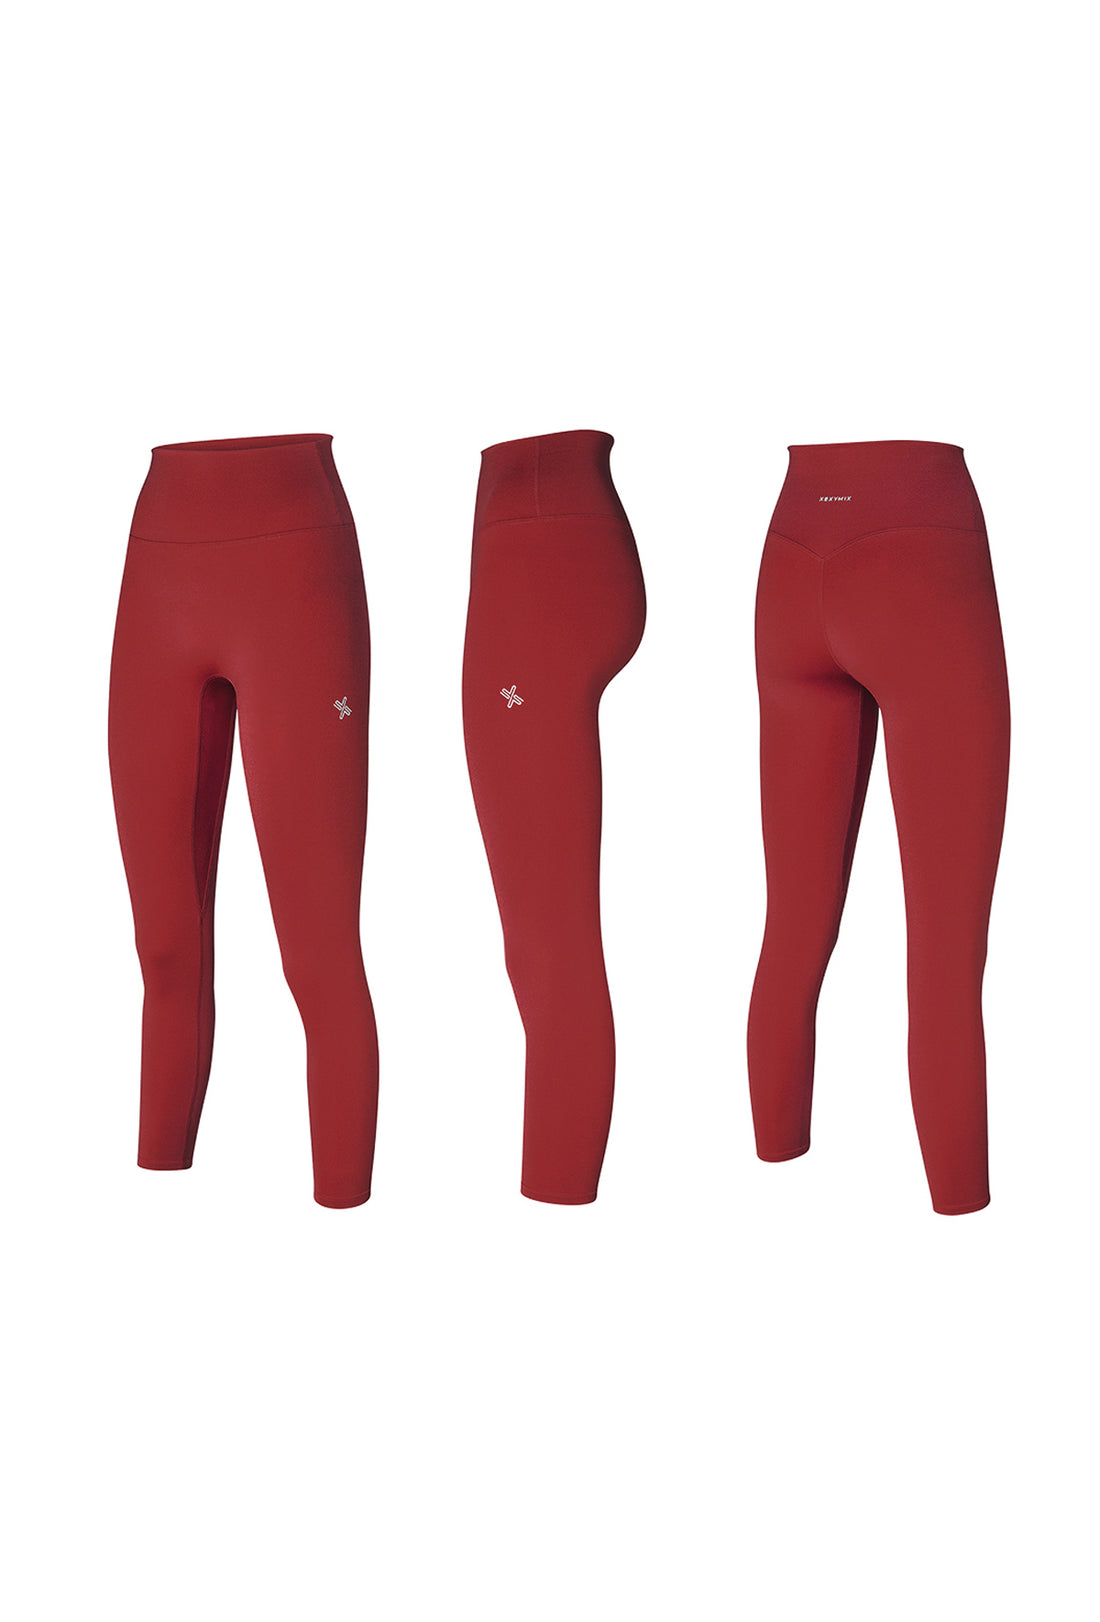 XEXYMIX V-Up 3D Plus Leggings - Persian red